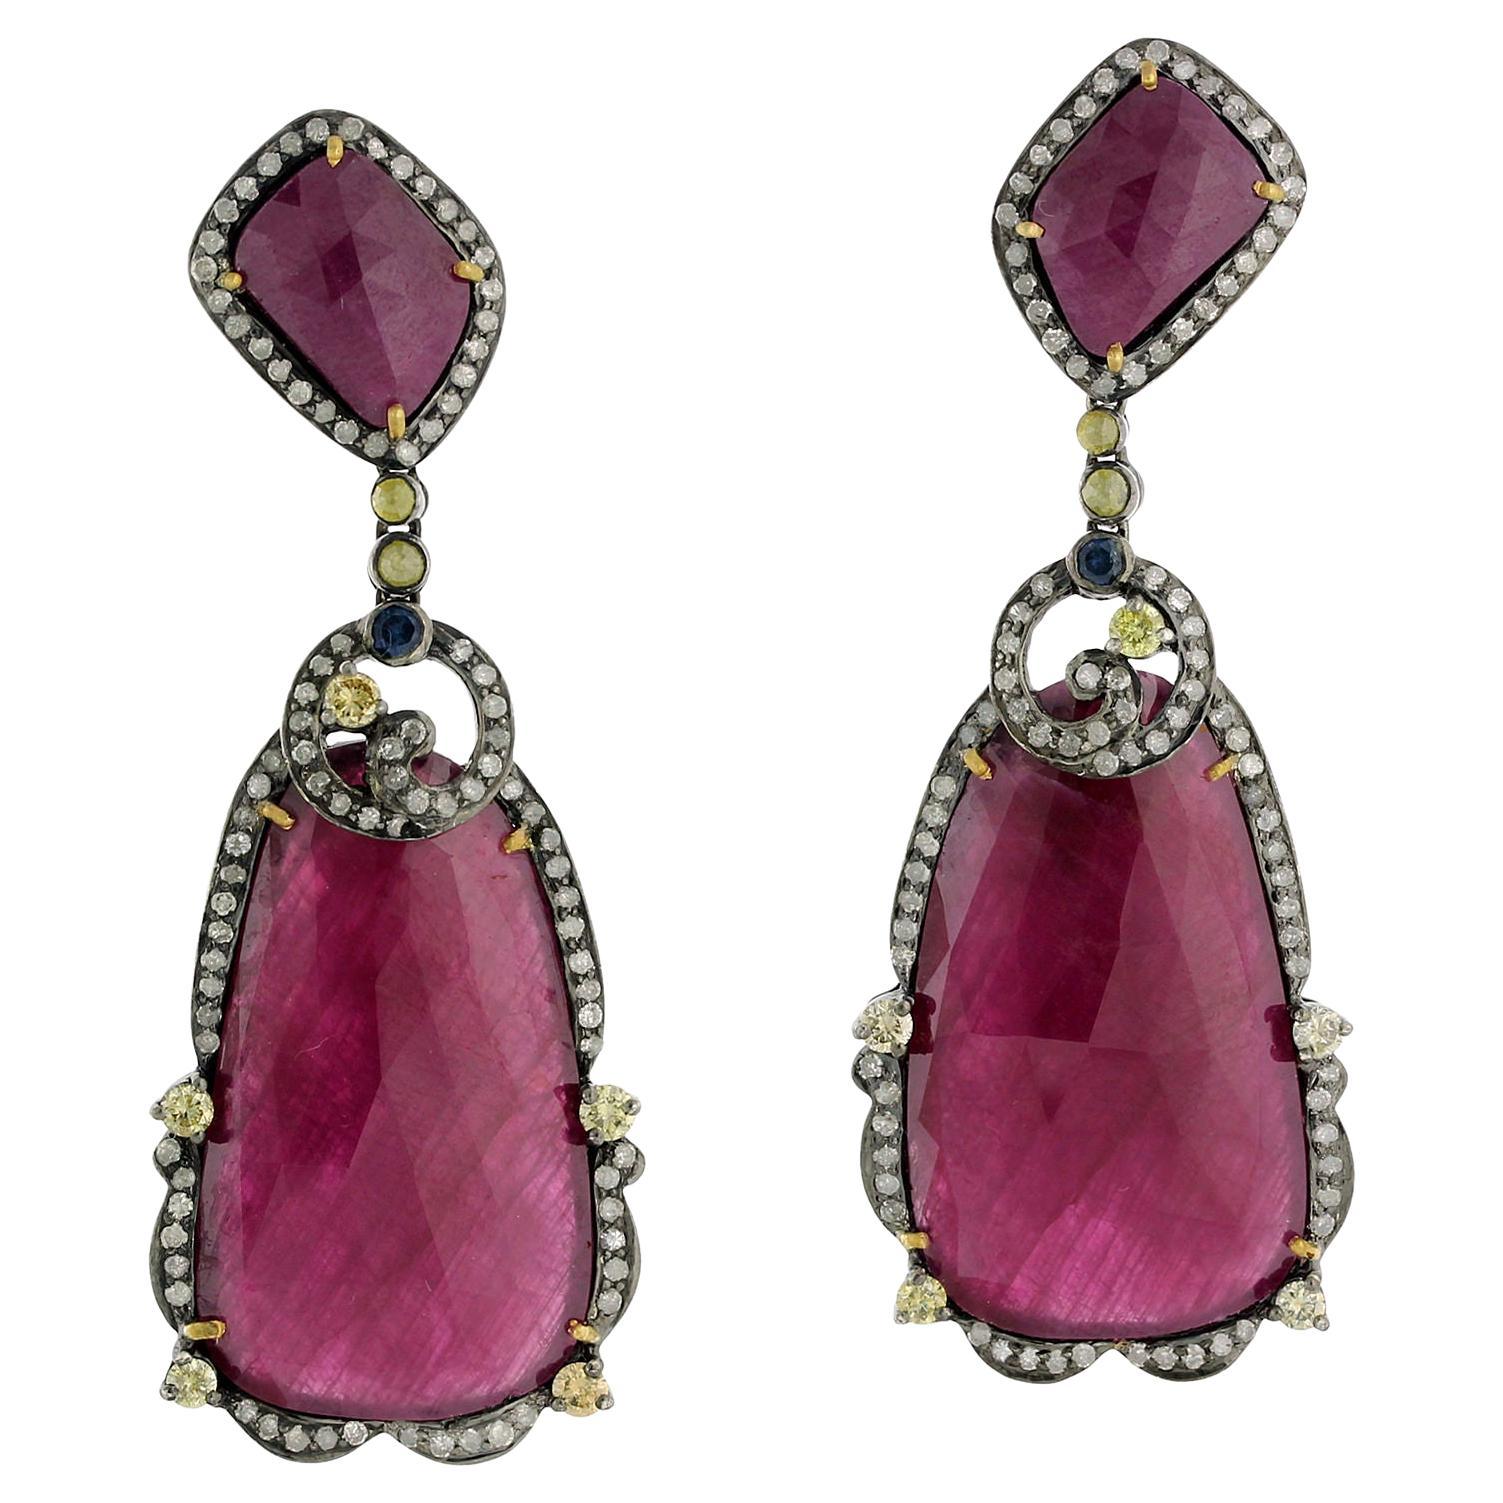 Sliced Ruby Earrings With Blue Sapphire & Pave Diamonds In 18k Gold & Silver